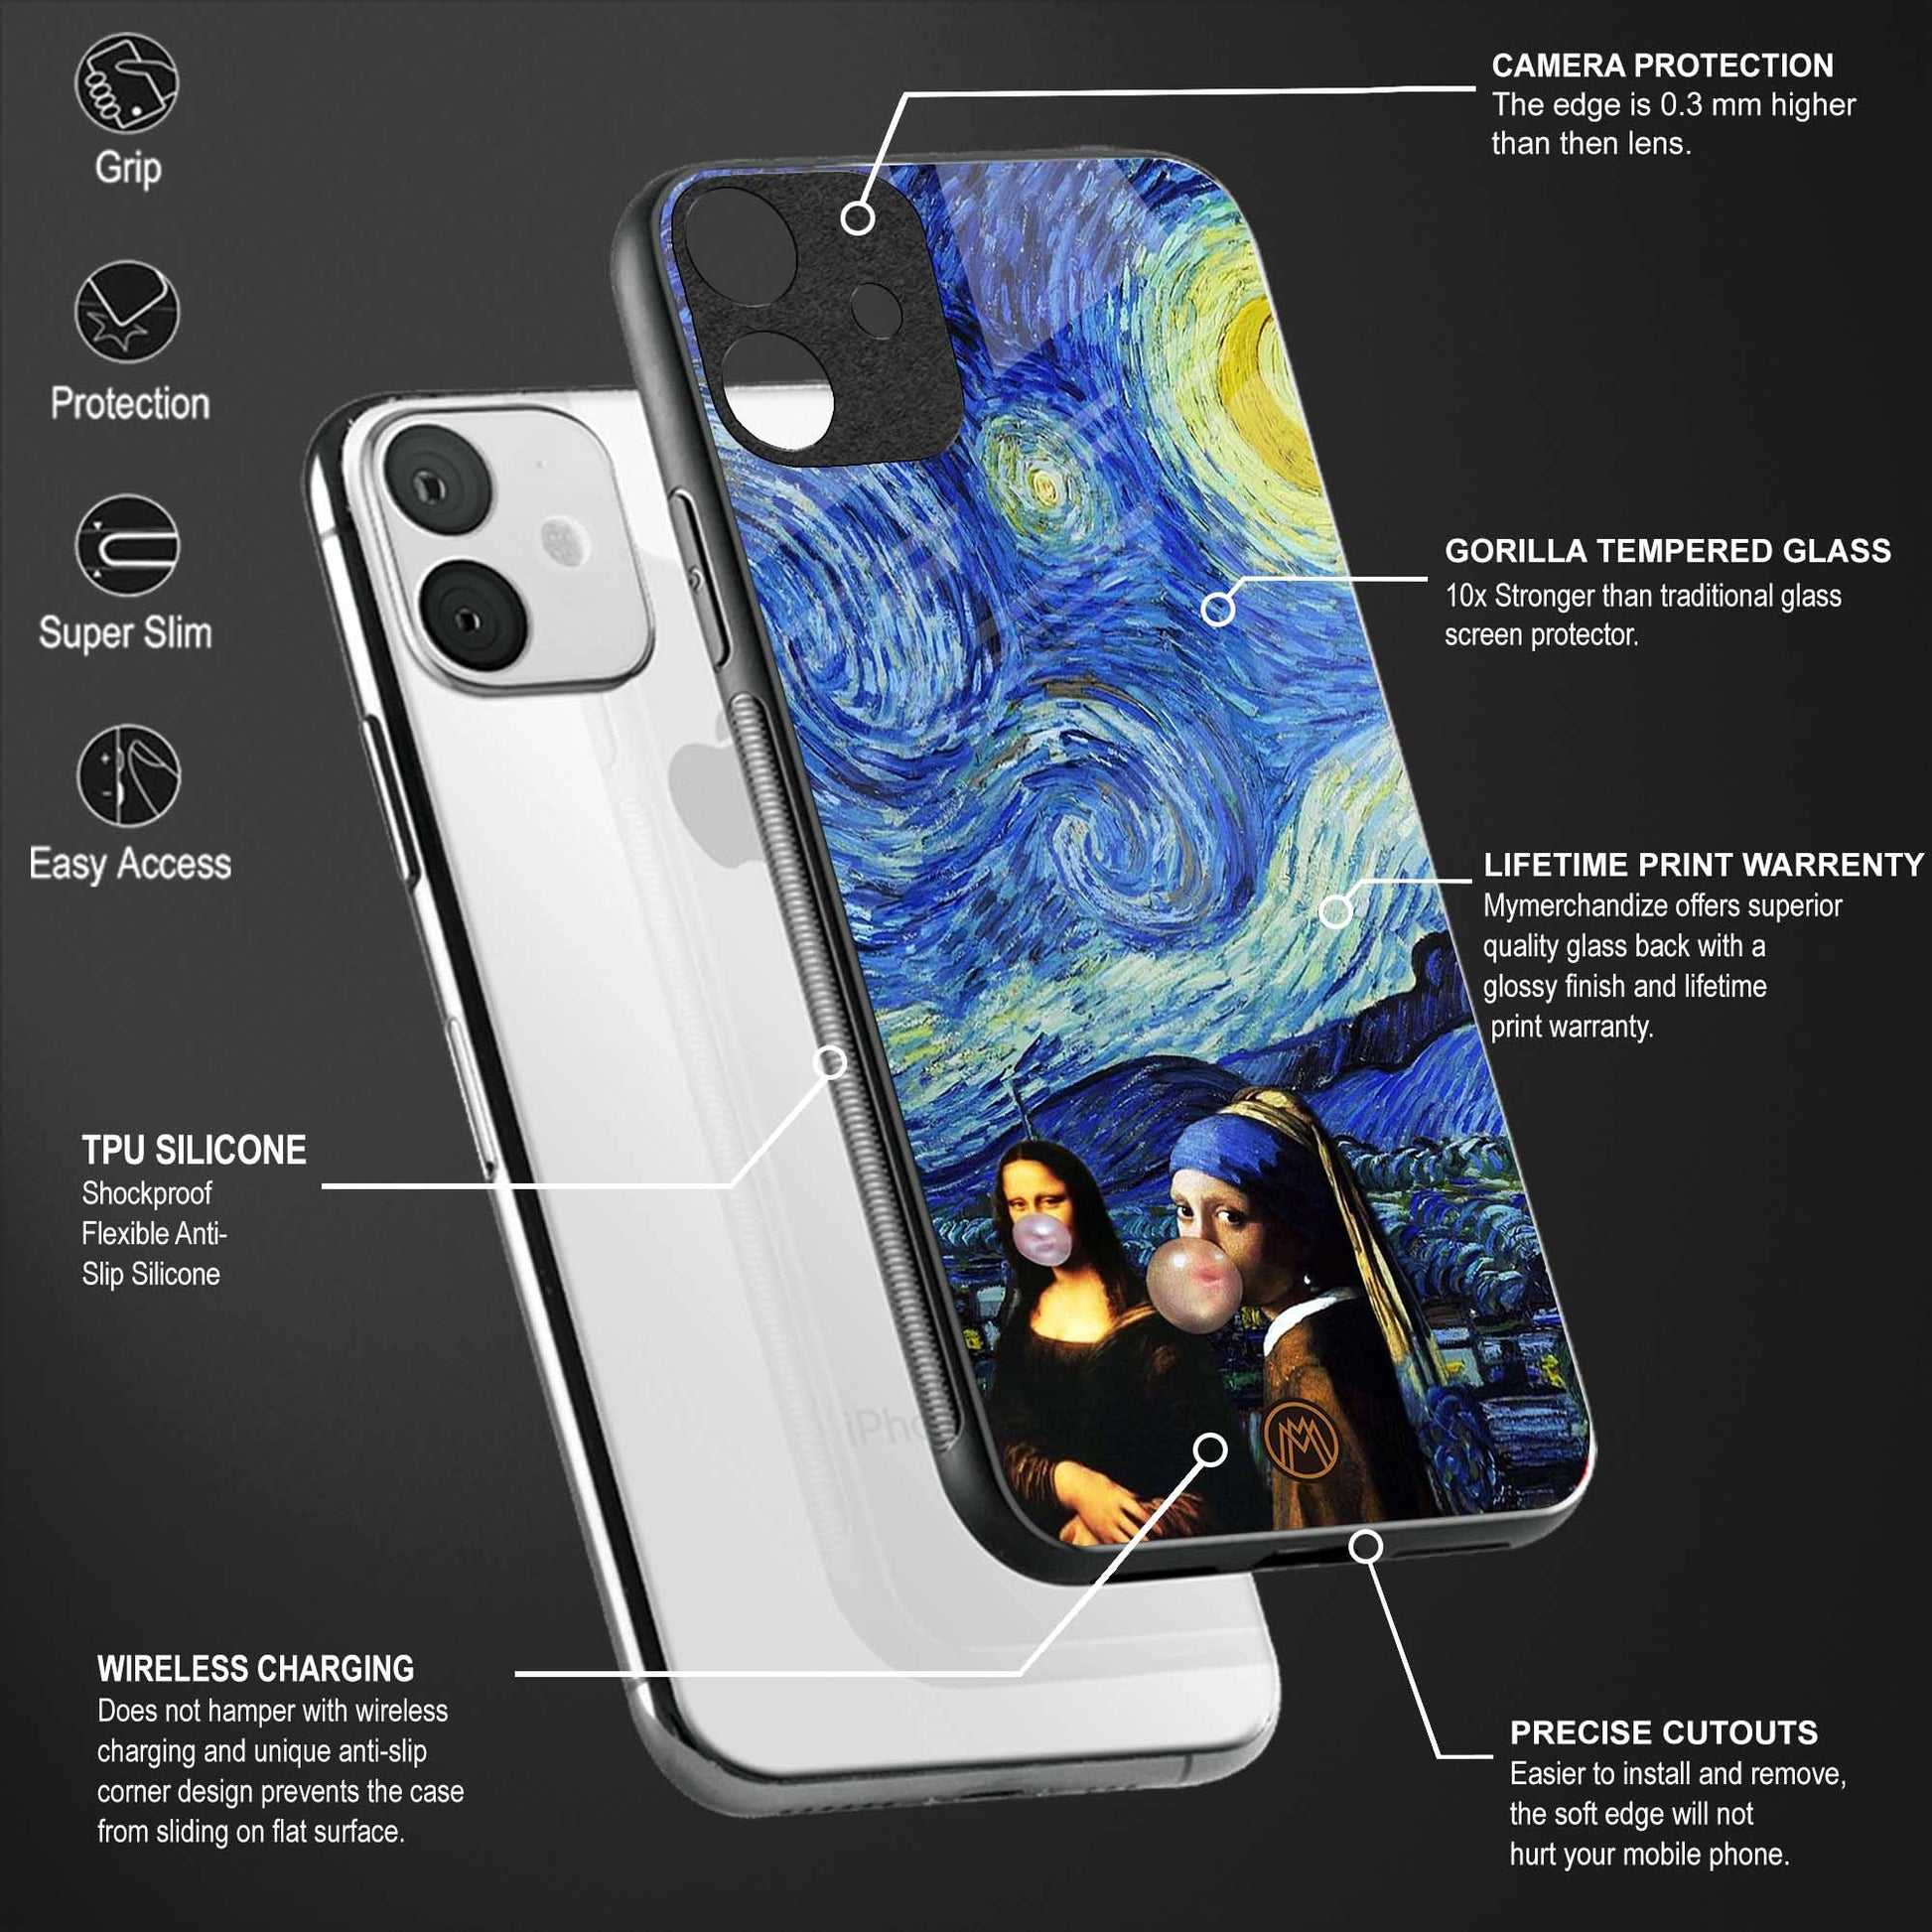 mona lisa starry night back phone cover | glass case for samsung galaxy a73 5g